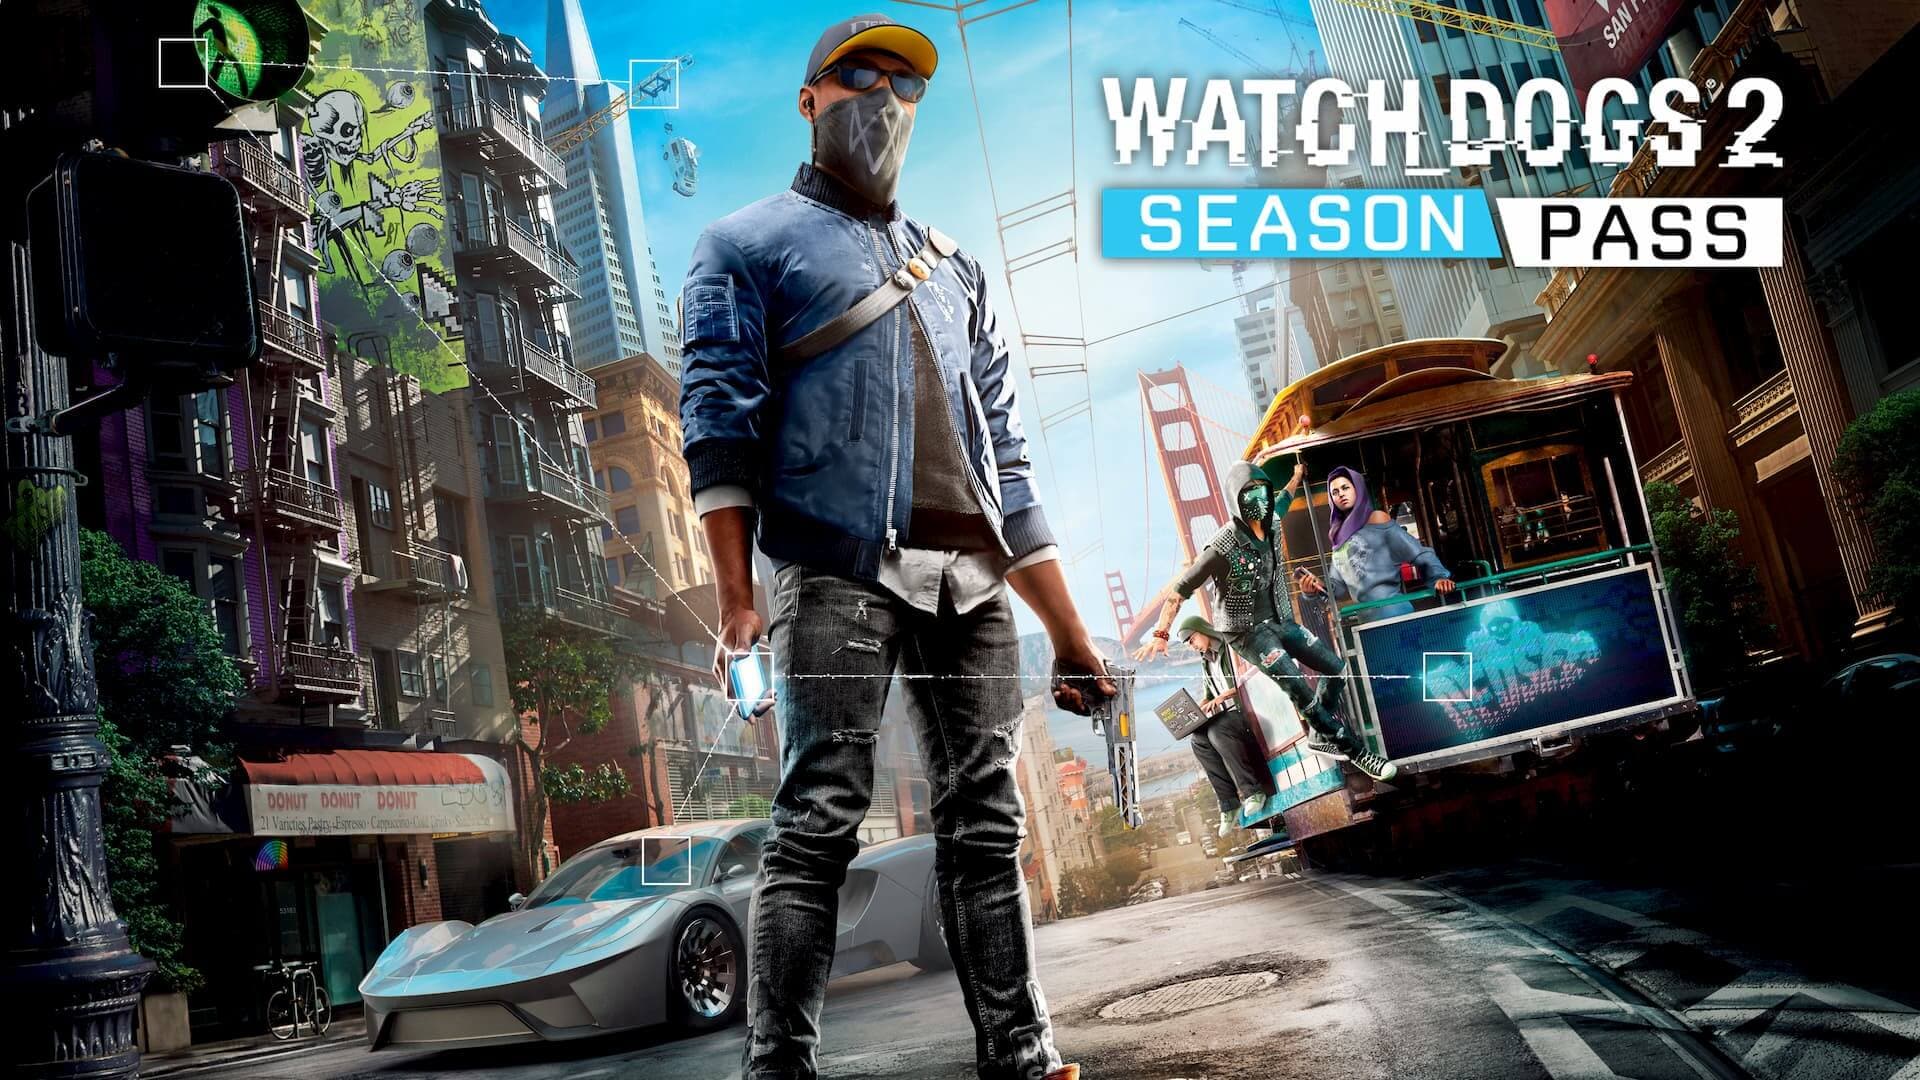 Watch Dogs 2 Full Cracked Latest Game With Torrent [2020] Full Version